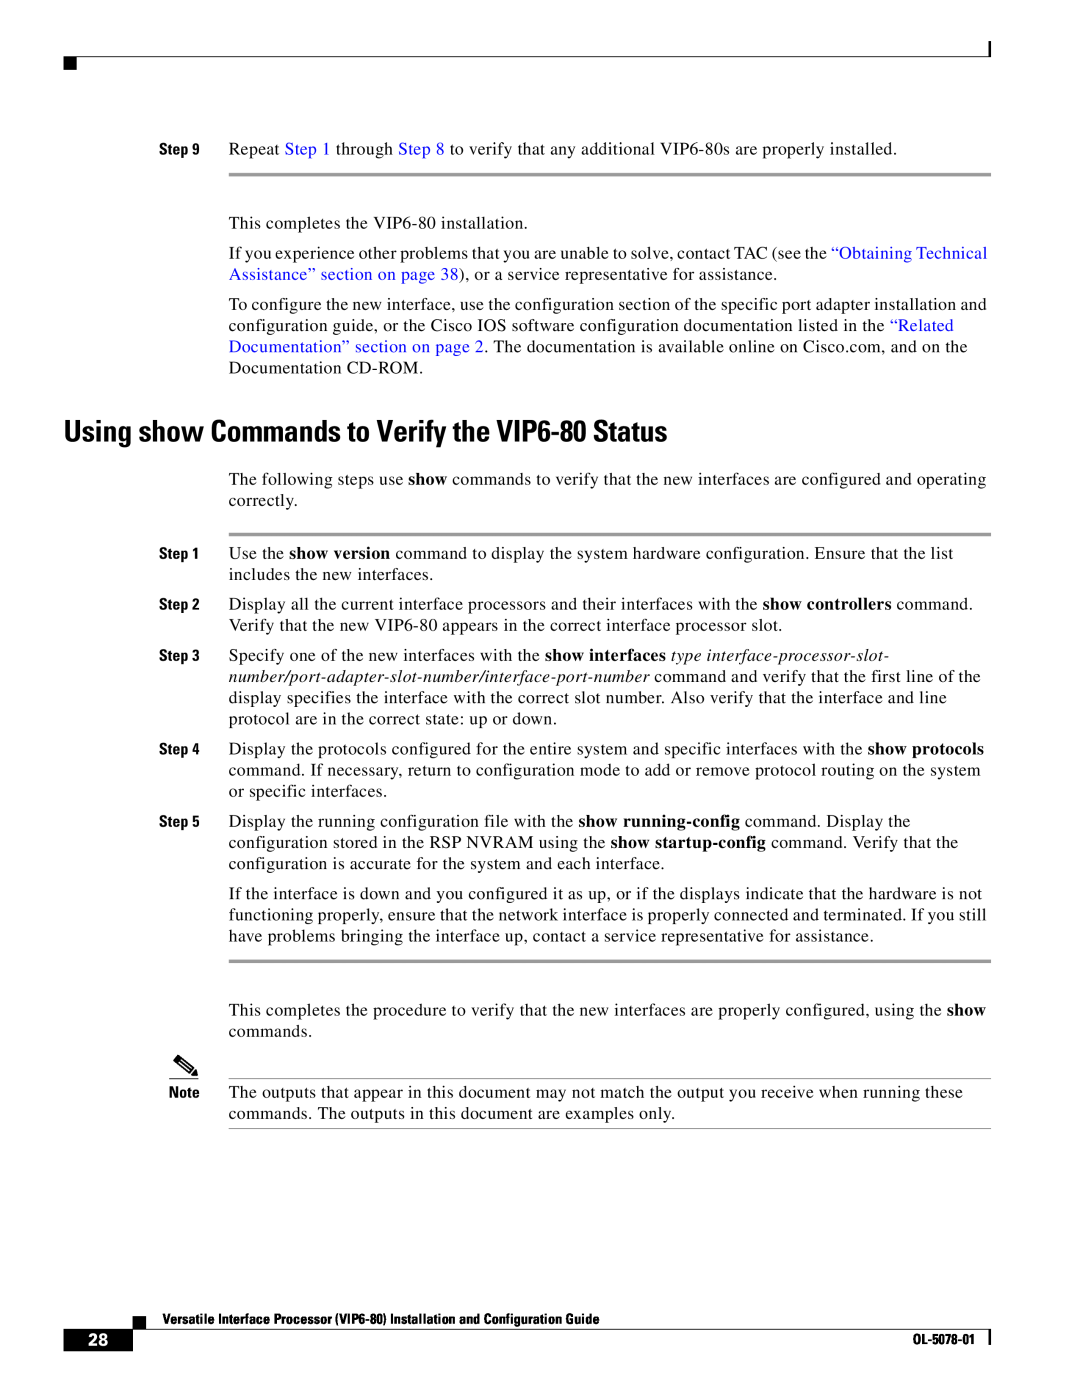 Cisco Systems (VIP6-80) manual Using show Commands to Verify the VIP6-80 Status 